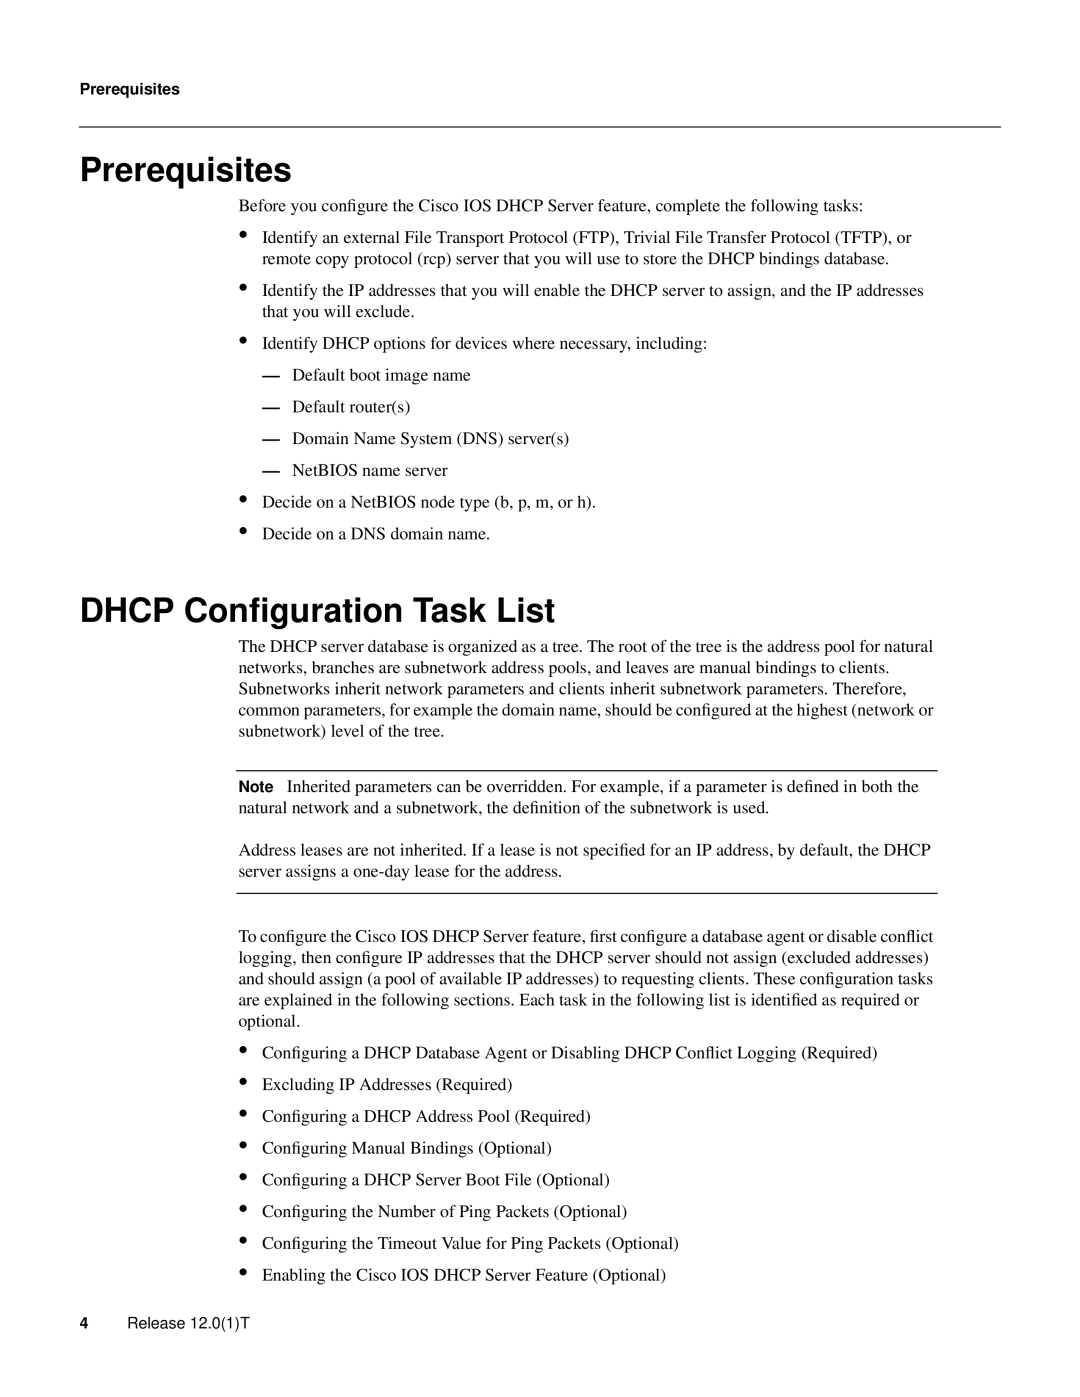 Cisco Systems 32369 manual Prerequisites, DHCP Conﬁguration Task List 